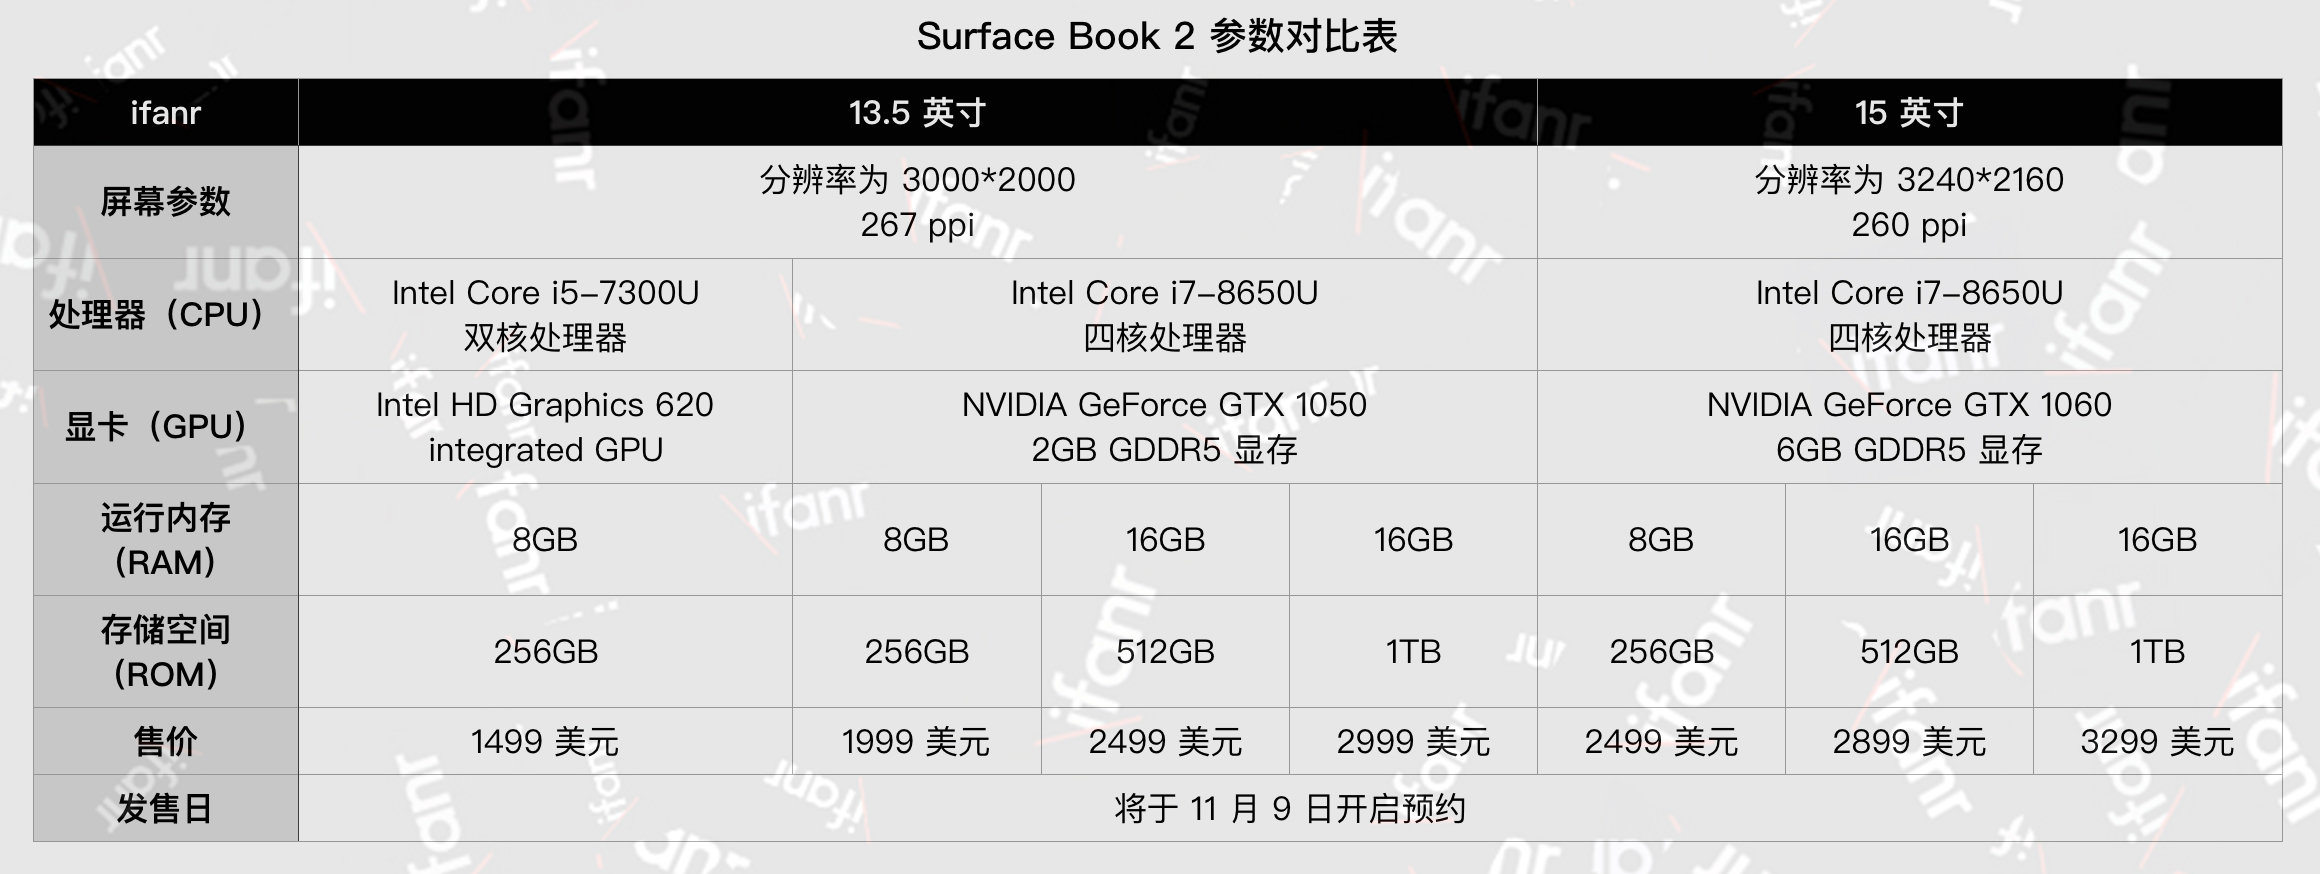 Surface Book 215Ӣ 3299Ԫ